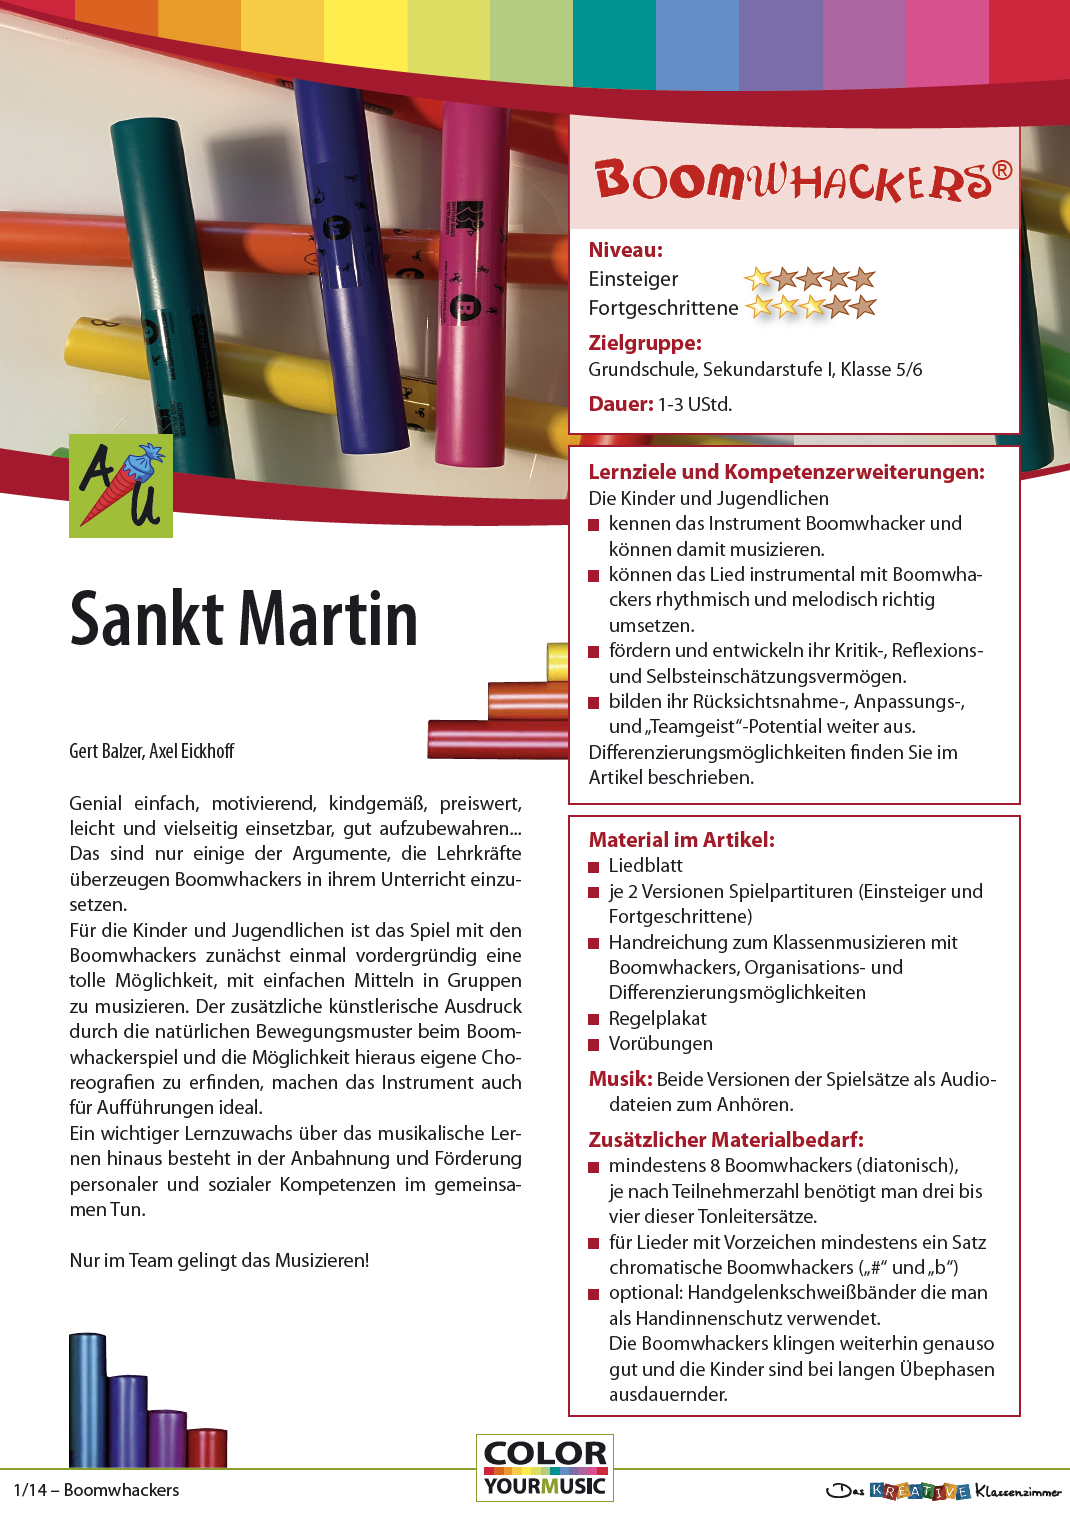 Sankt Martin - Boomwhackers